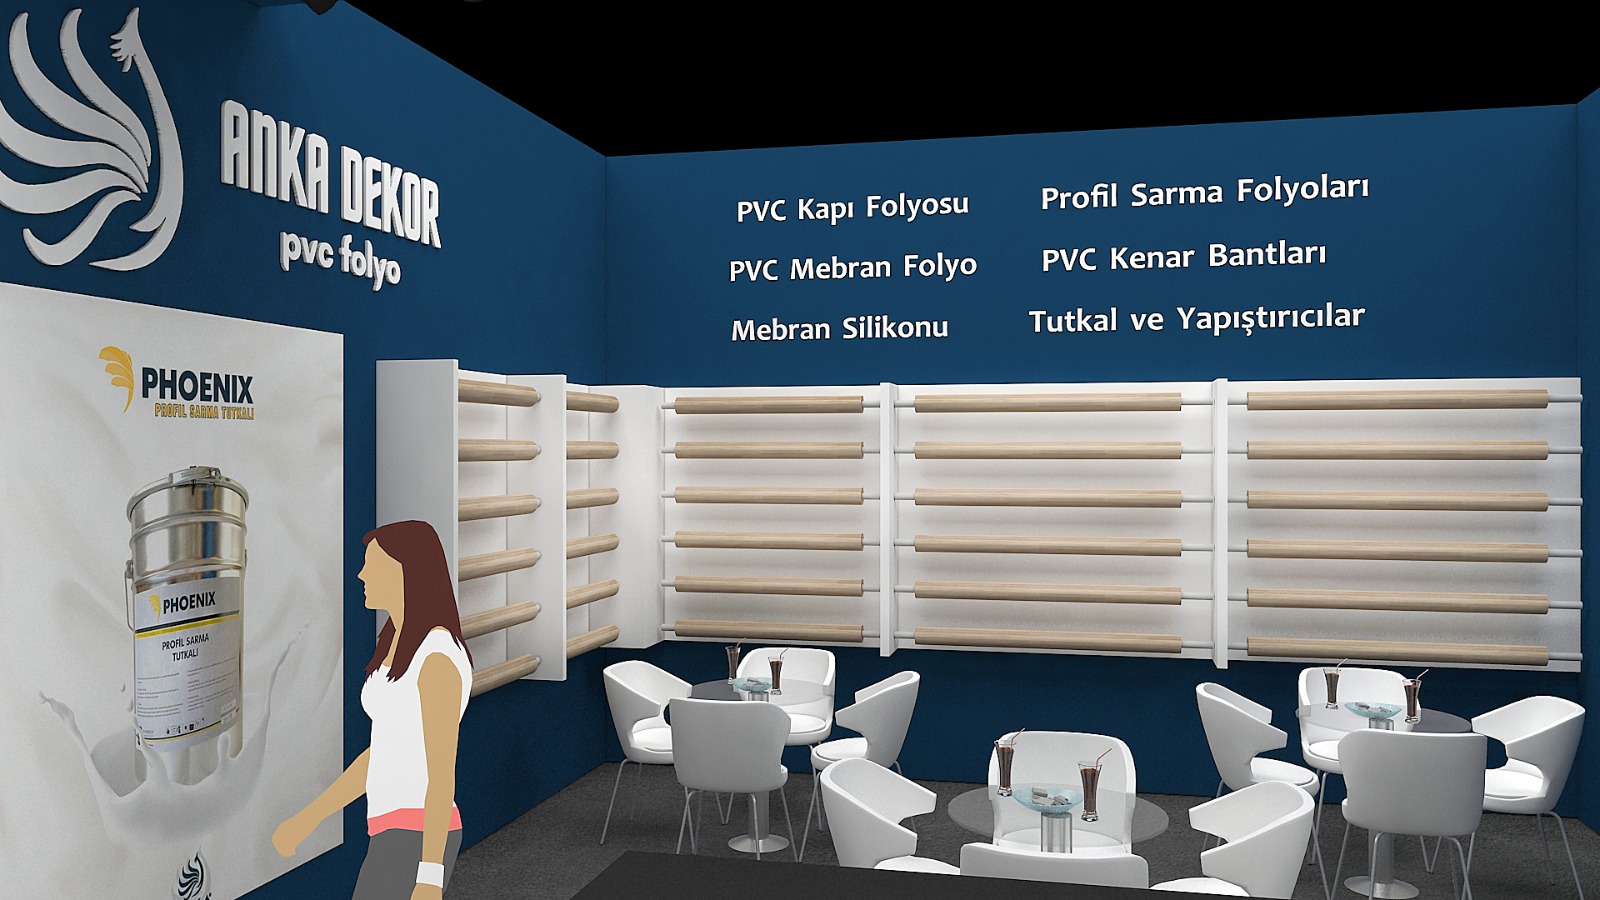 Client asked to participate at Belgrade fair, and wanted a nice stand so we made it possible.